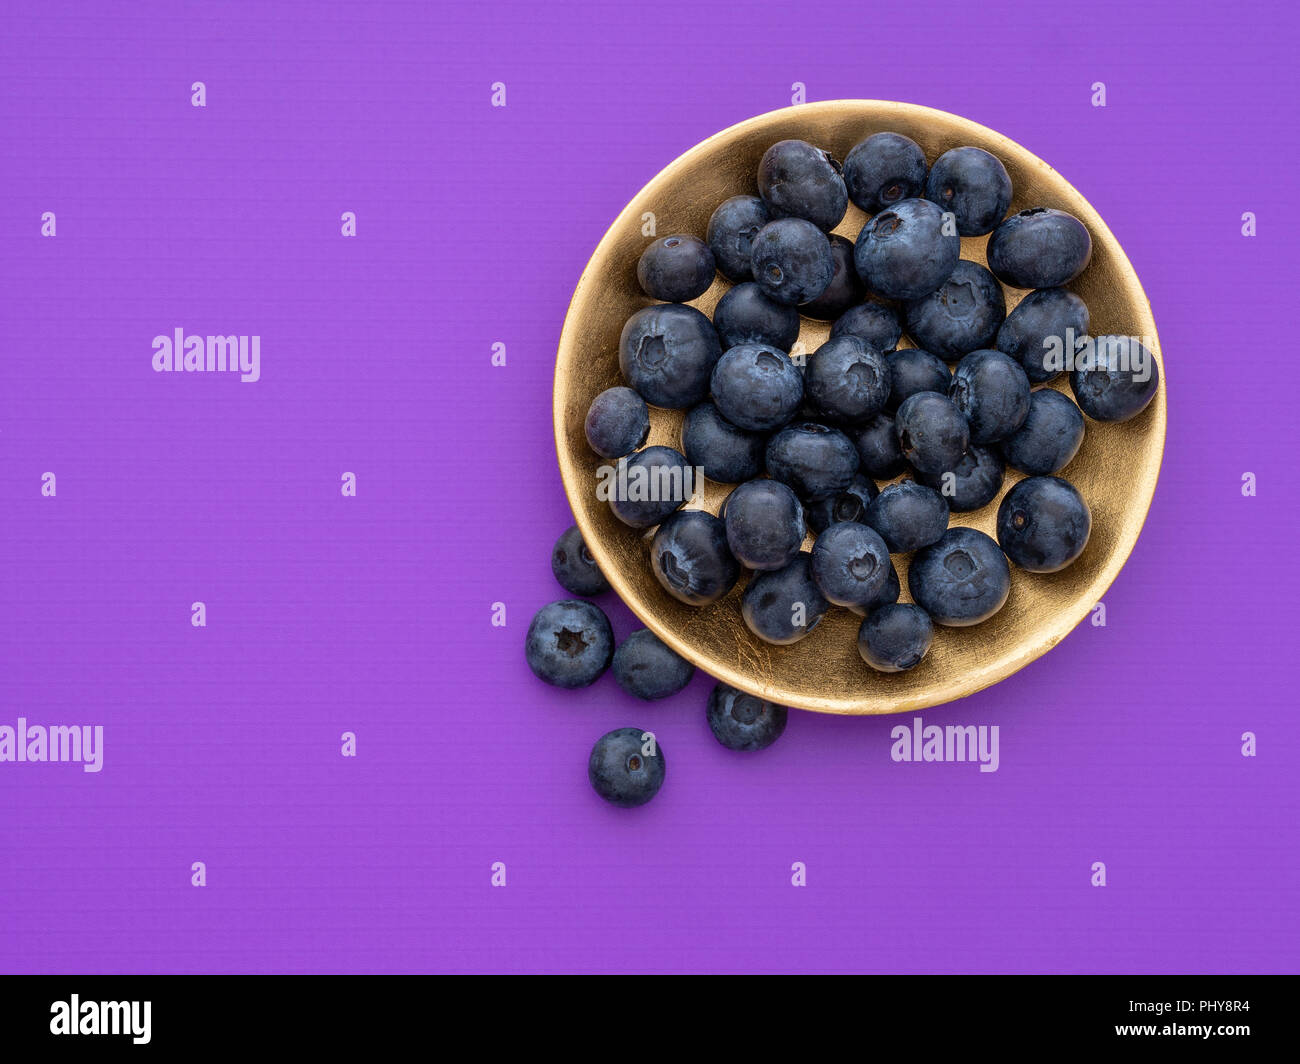 Beautiful healthy superfood blueberries on beautiful gold coloured plate on purple, violet with copyspace. Stock Photo